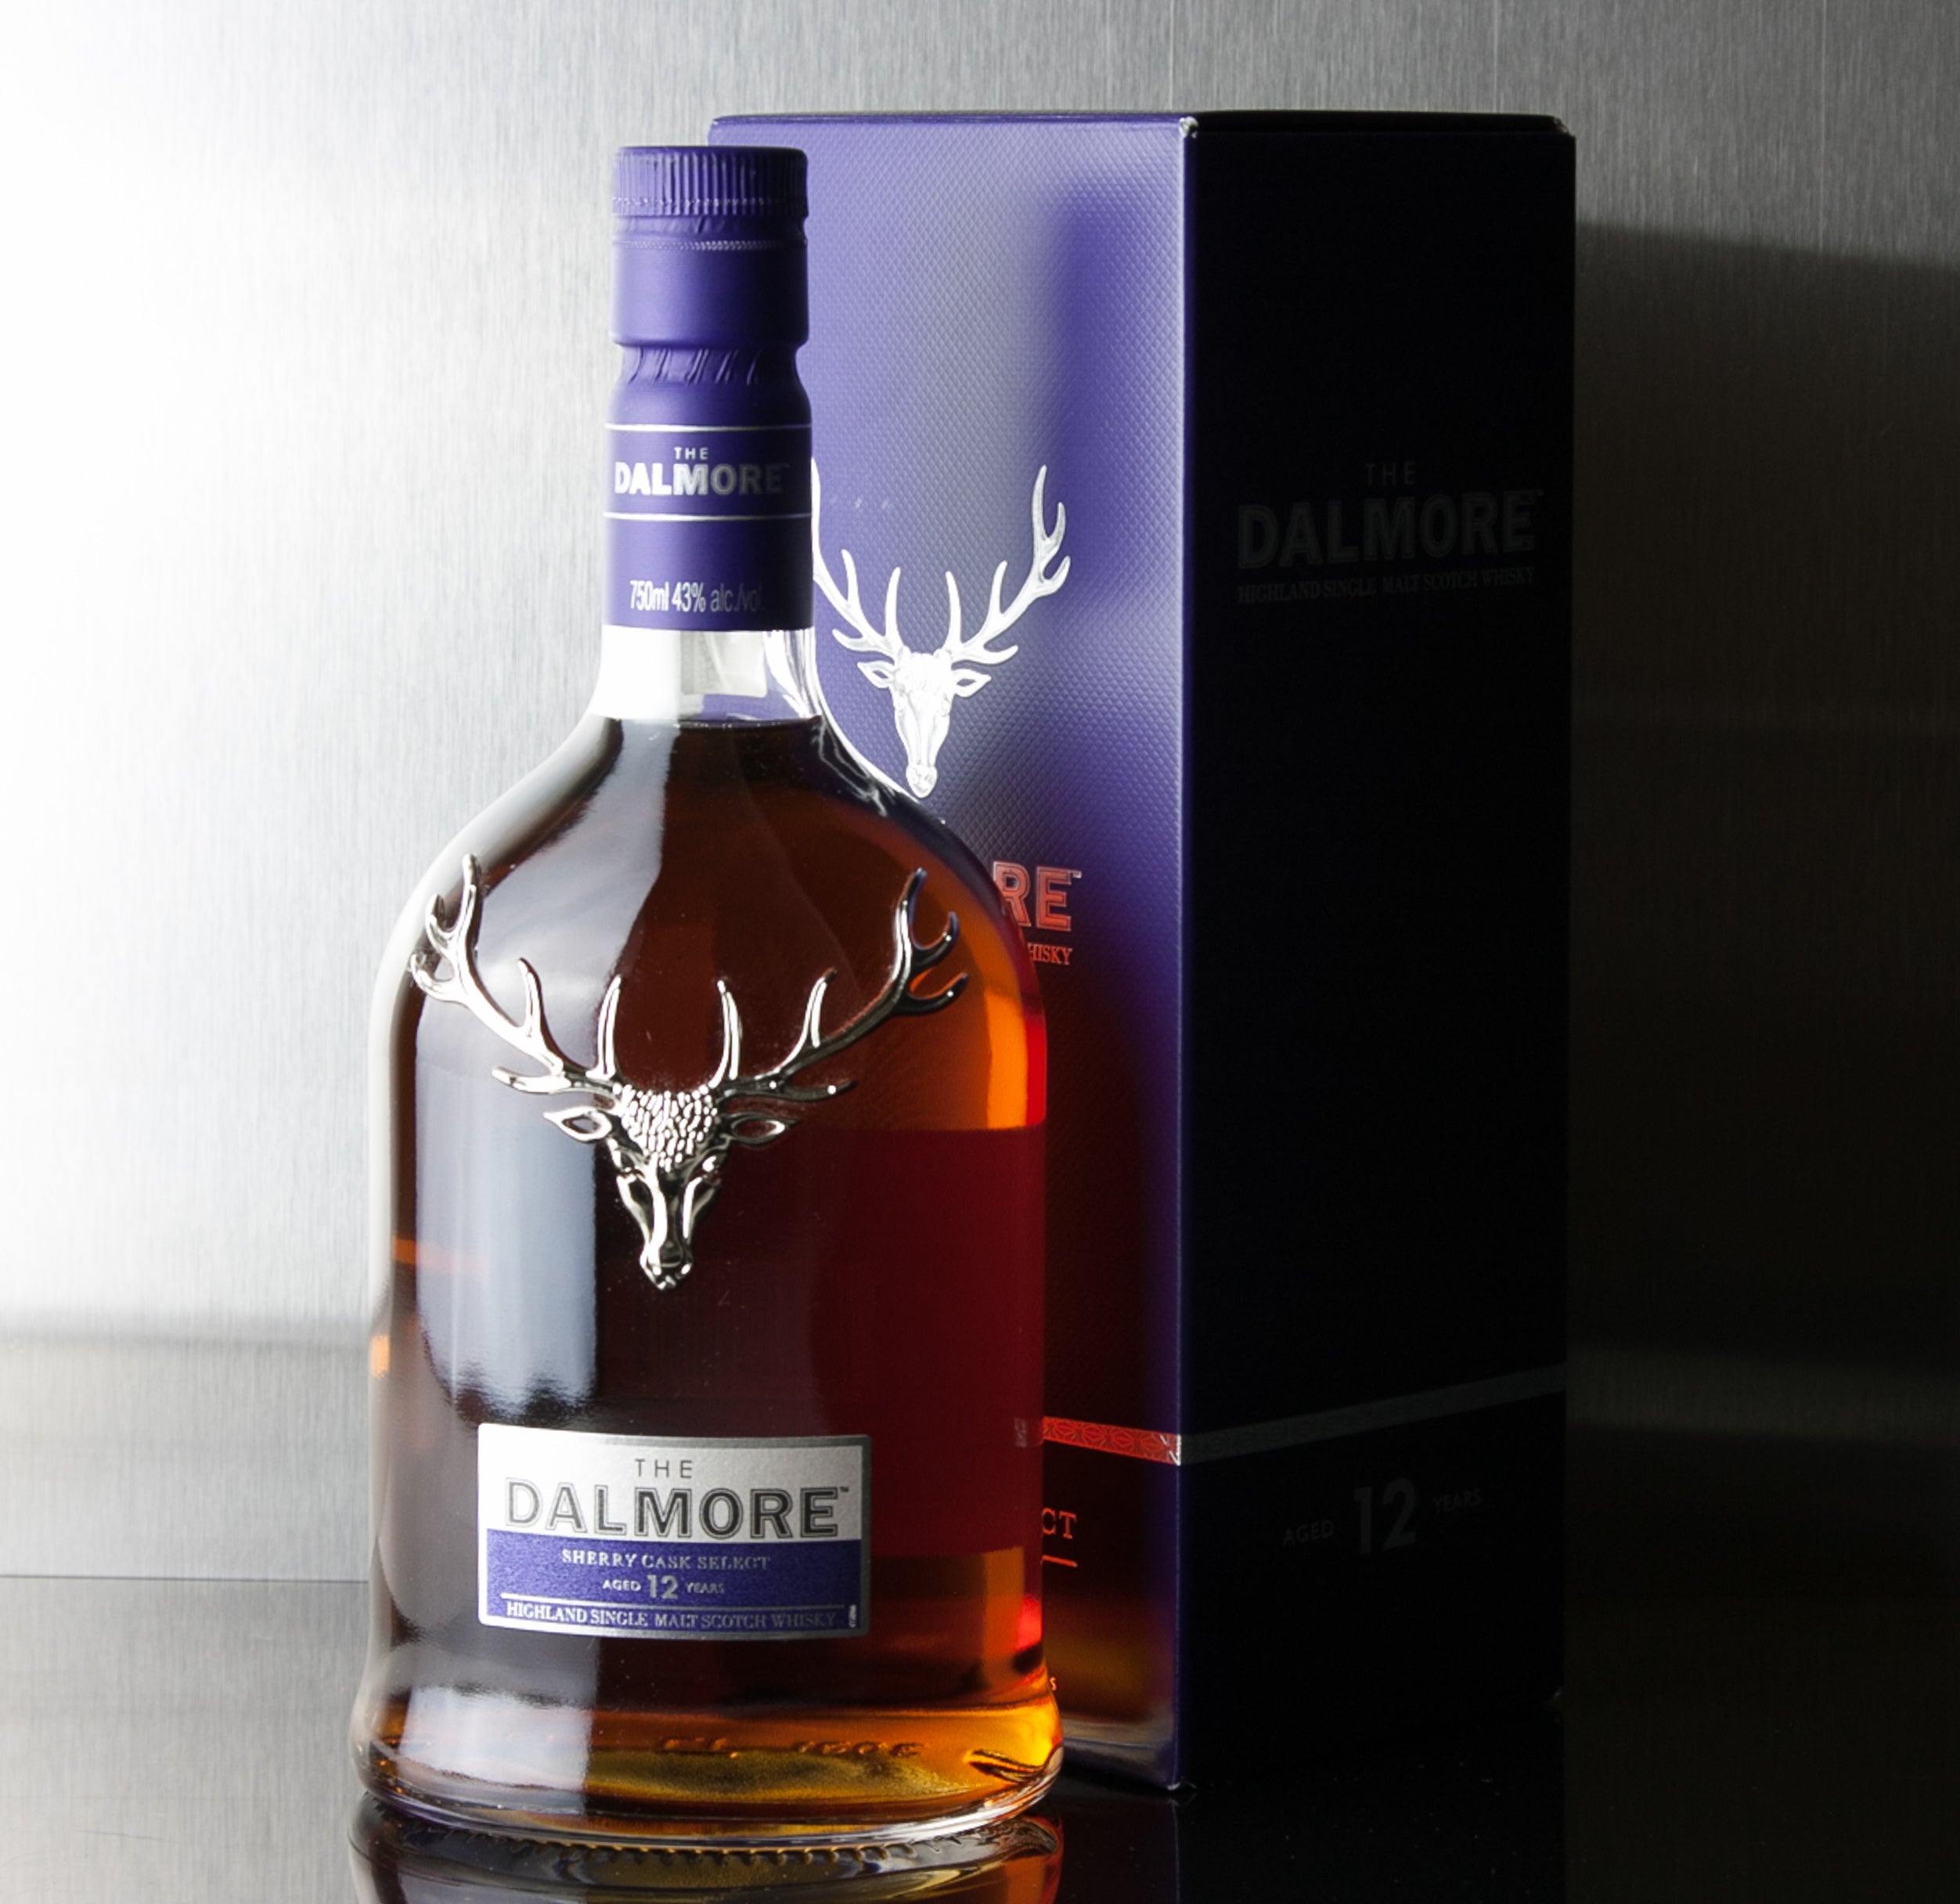 Dalmore Sherry Cask Select 12 Year